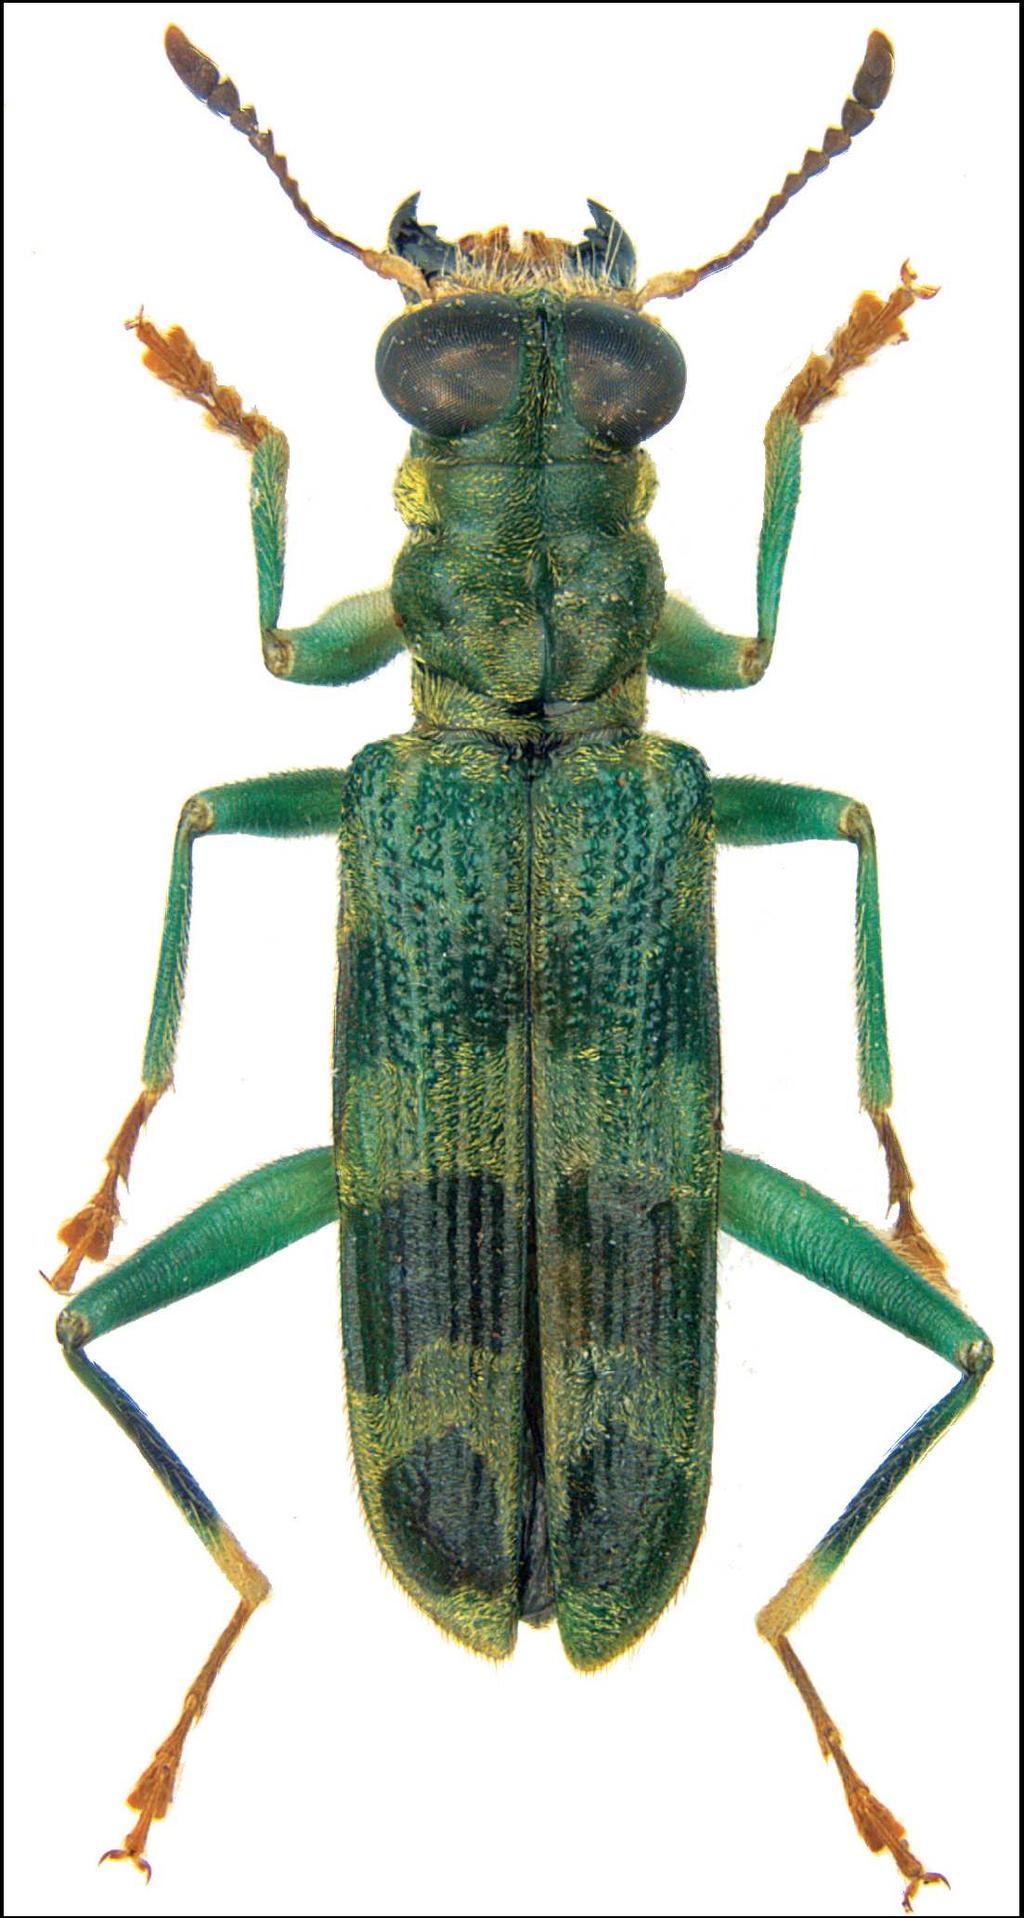 xylobiontic beetles, which is approx. 10 % of all species known from Bavaria. The most species occurred on oak.